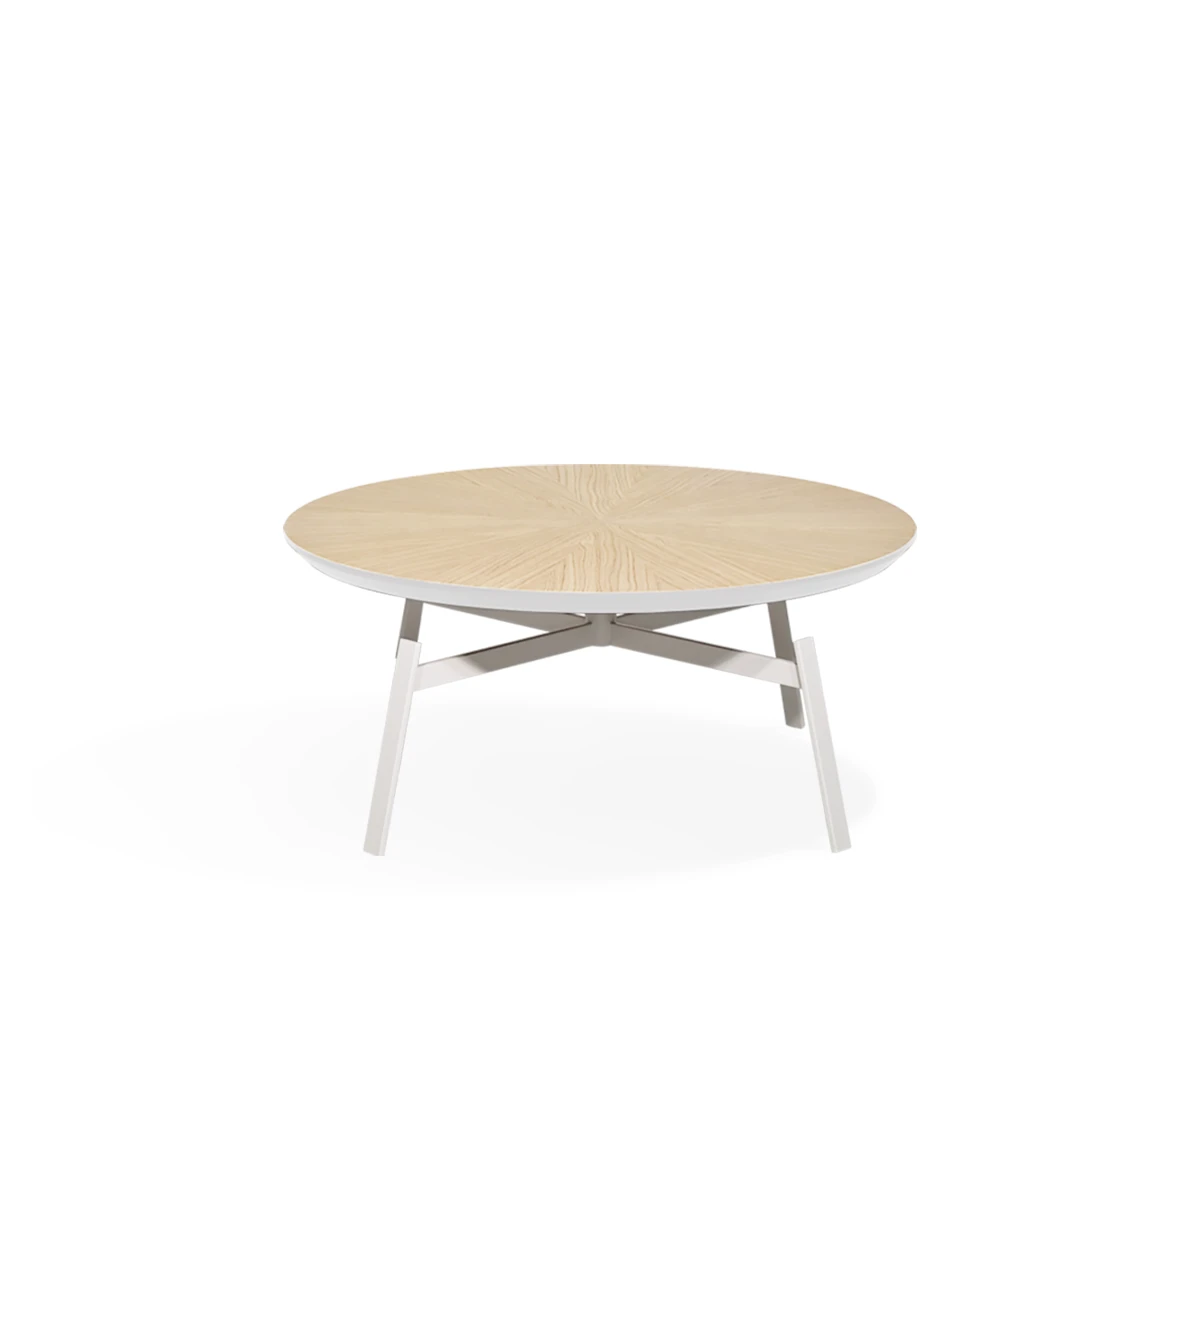 Tokyo round center table, natural oak top and pearl lacquered metal feet, Ø 100 cm.